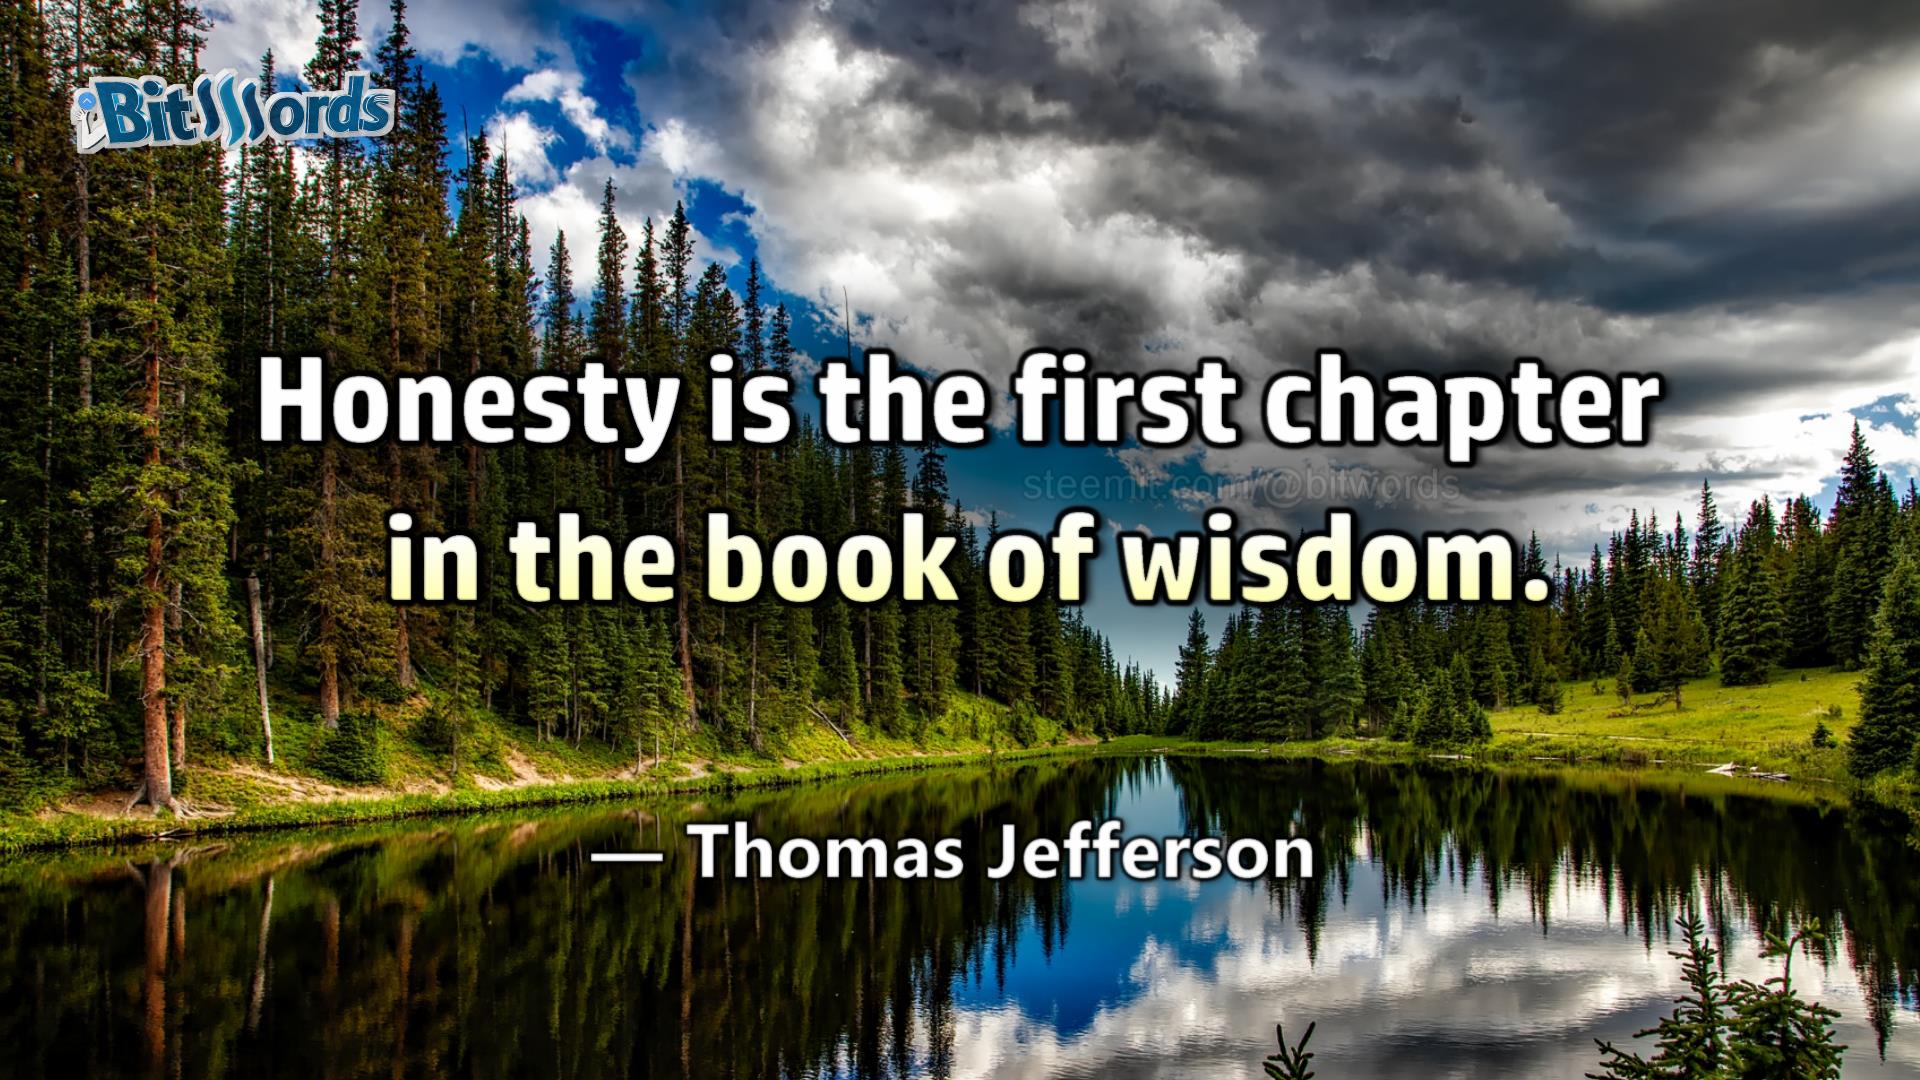 bitwords steemit quote of the day thomas jefferson honesty is the first chapter in the book of wisdom.jpg